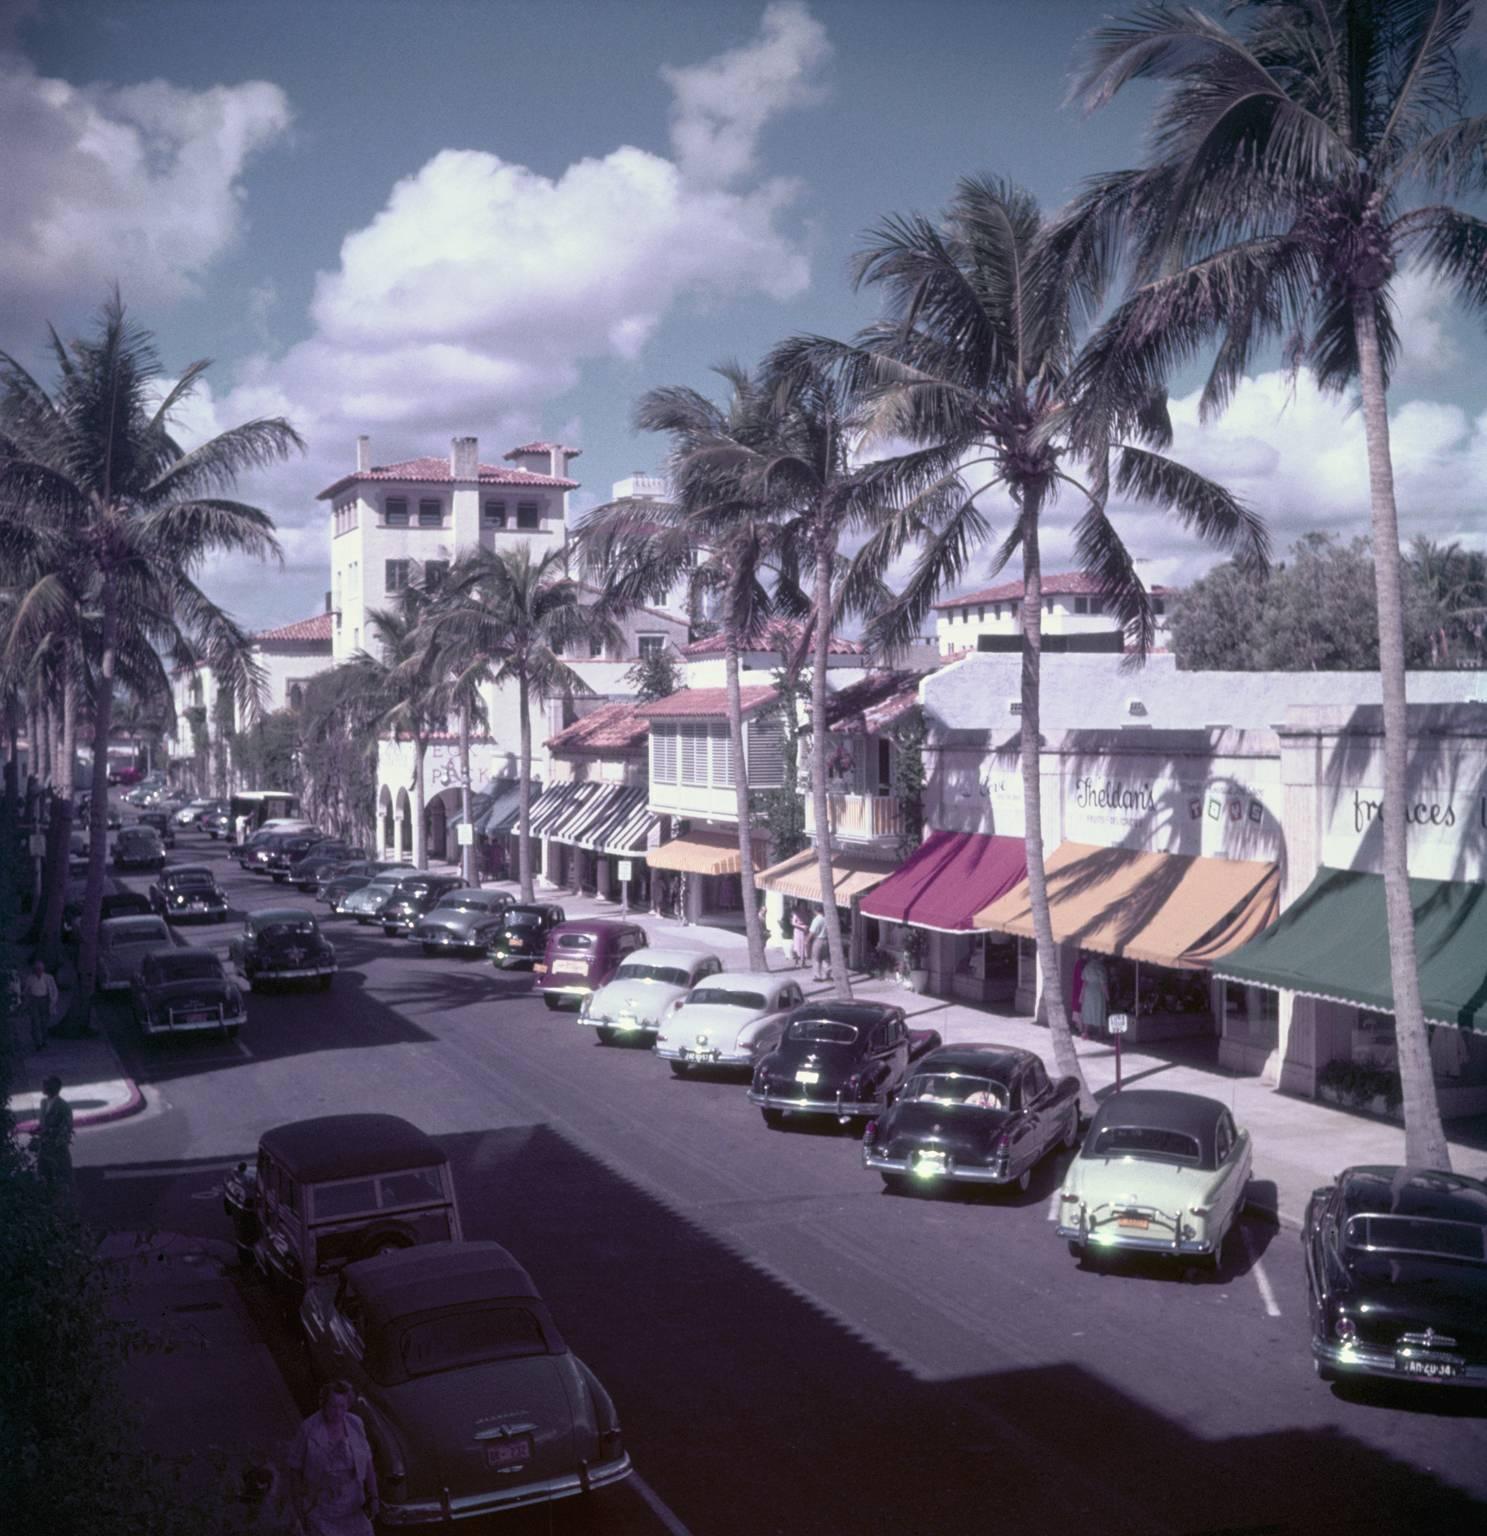 Slim Aarons Landscape Photograph - 'Palm Beach Street'  (Estate Stamped Edition)